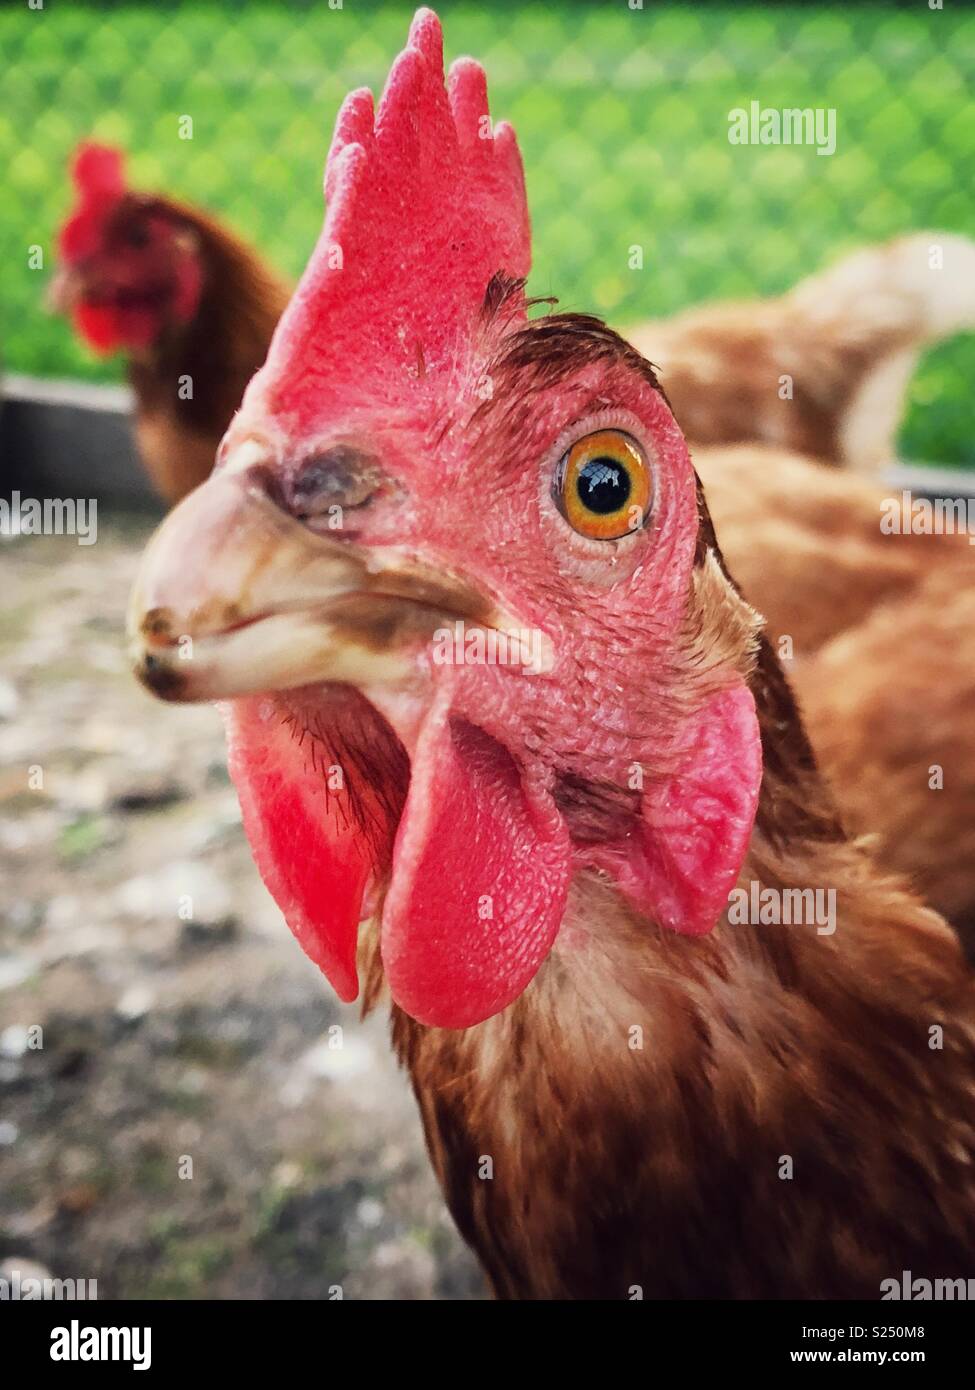 Closeup portrait of Rhode Island Red Hen looking at camera Banque D'Images